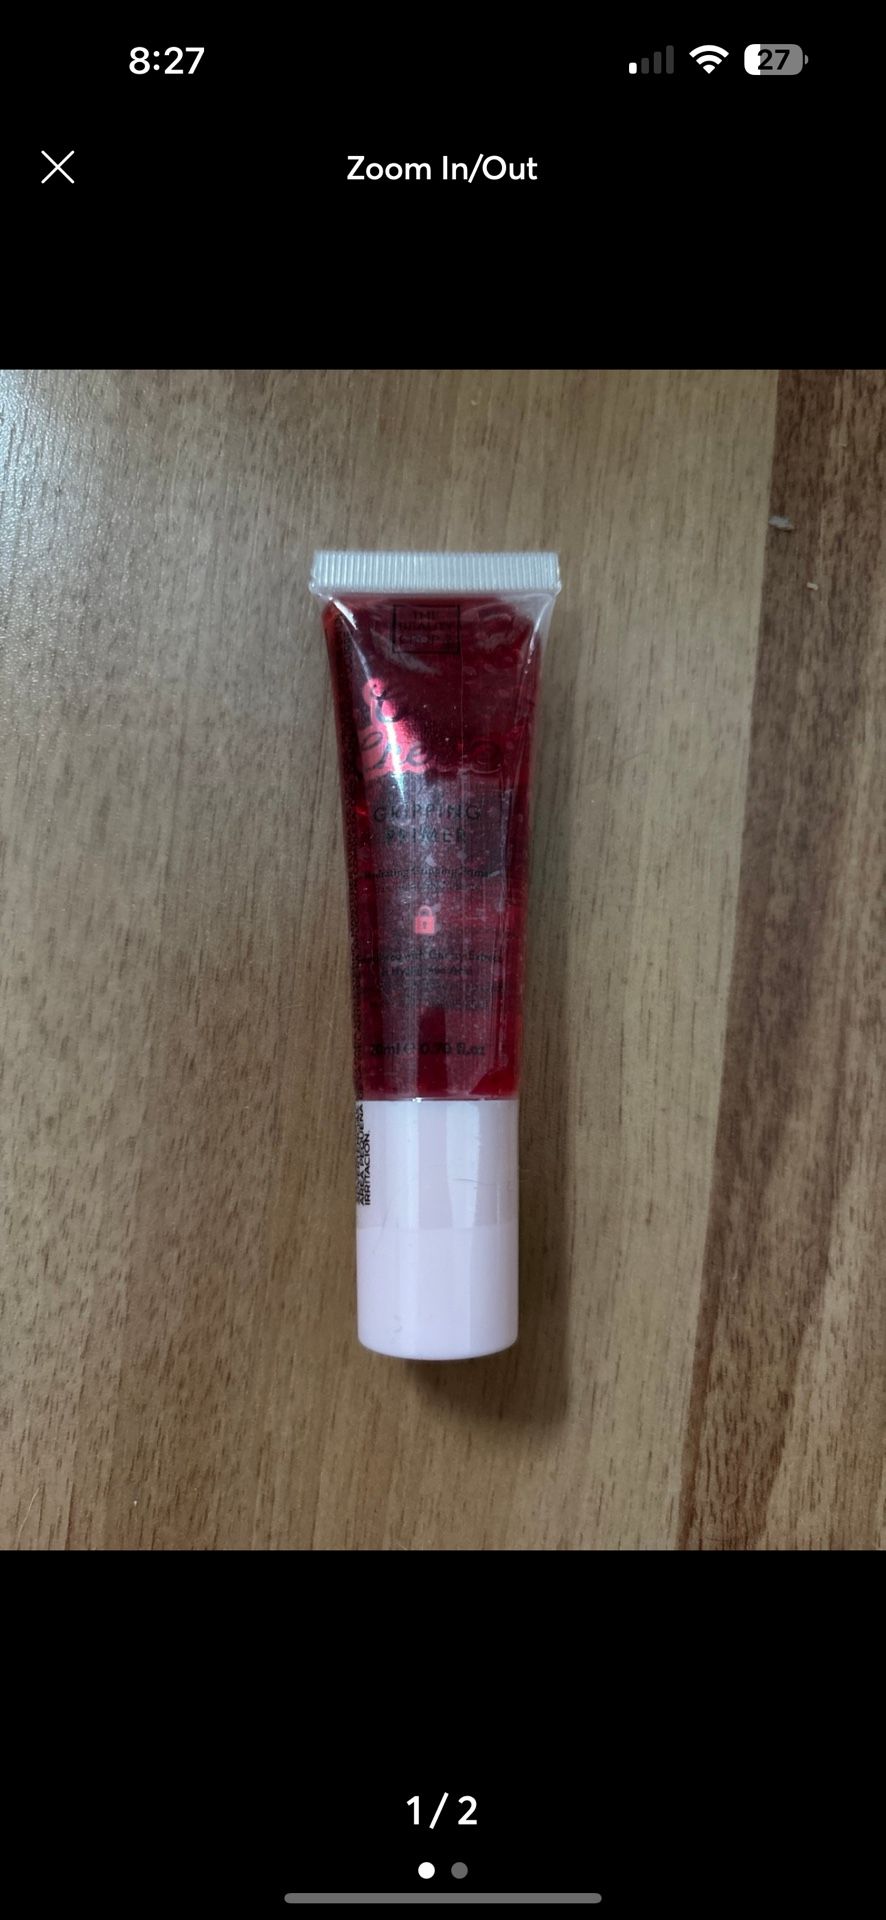 The Beauty Crop Oui Cherie Gripping Face Primer